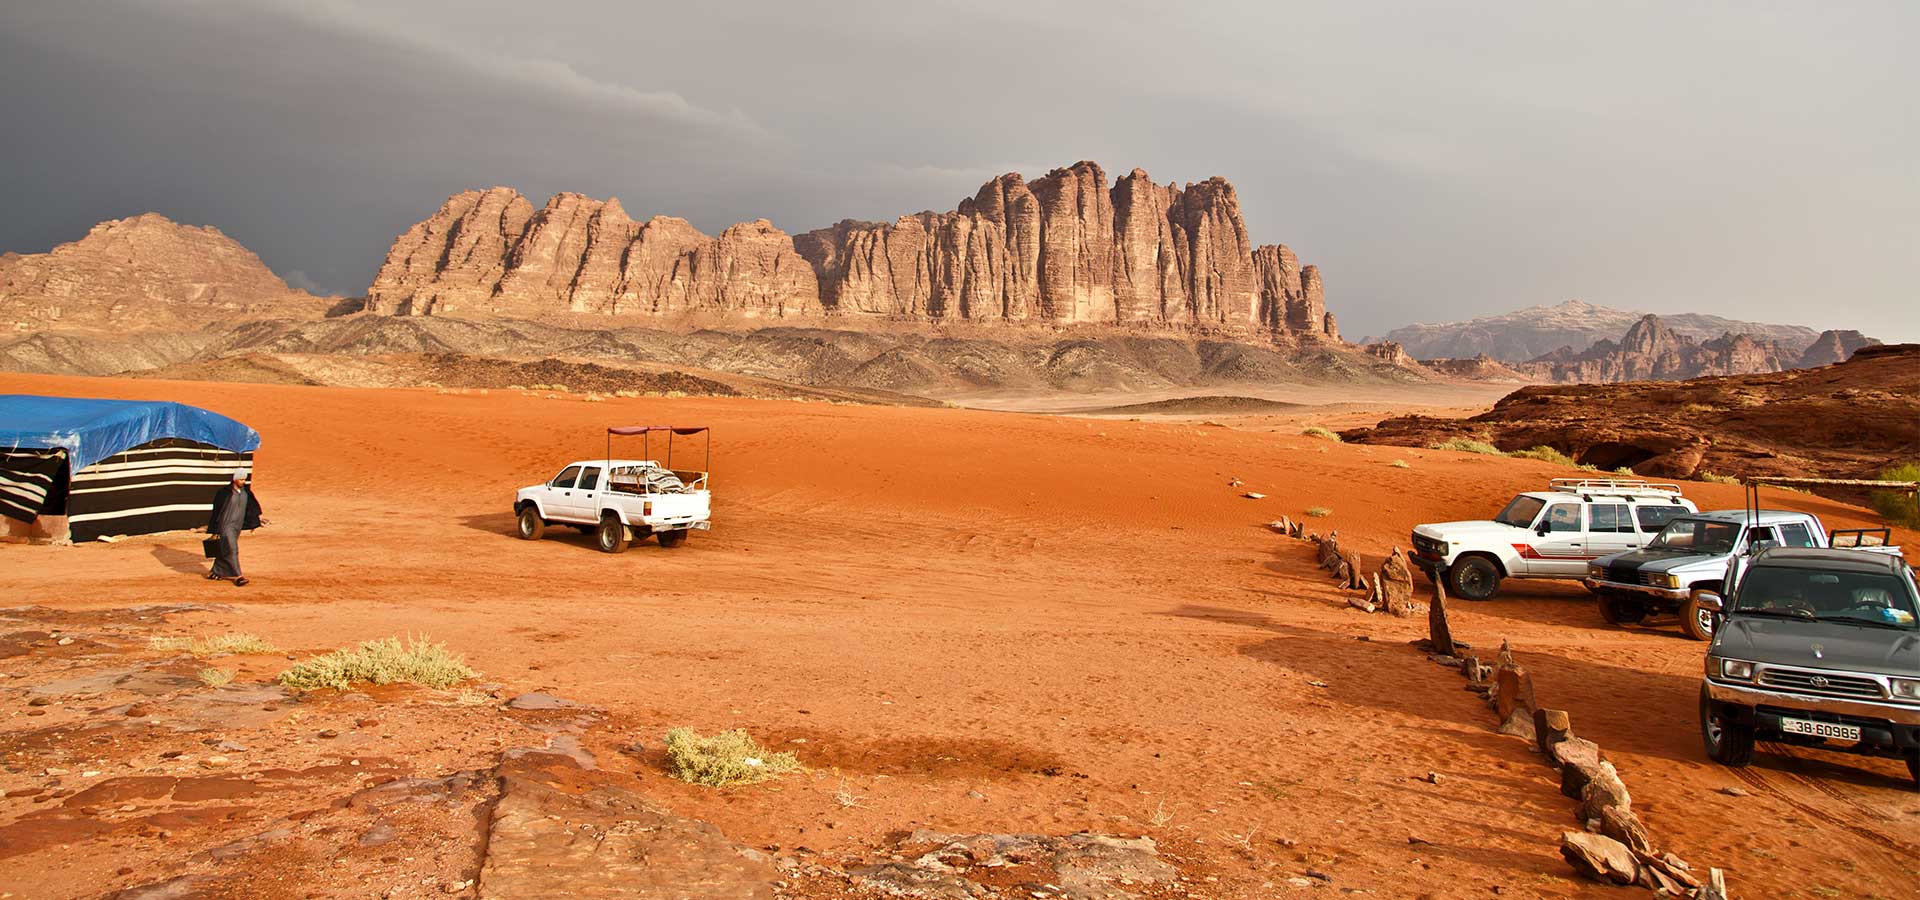 Explore Jordan with Exciting Travel Packages